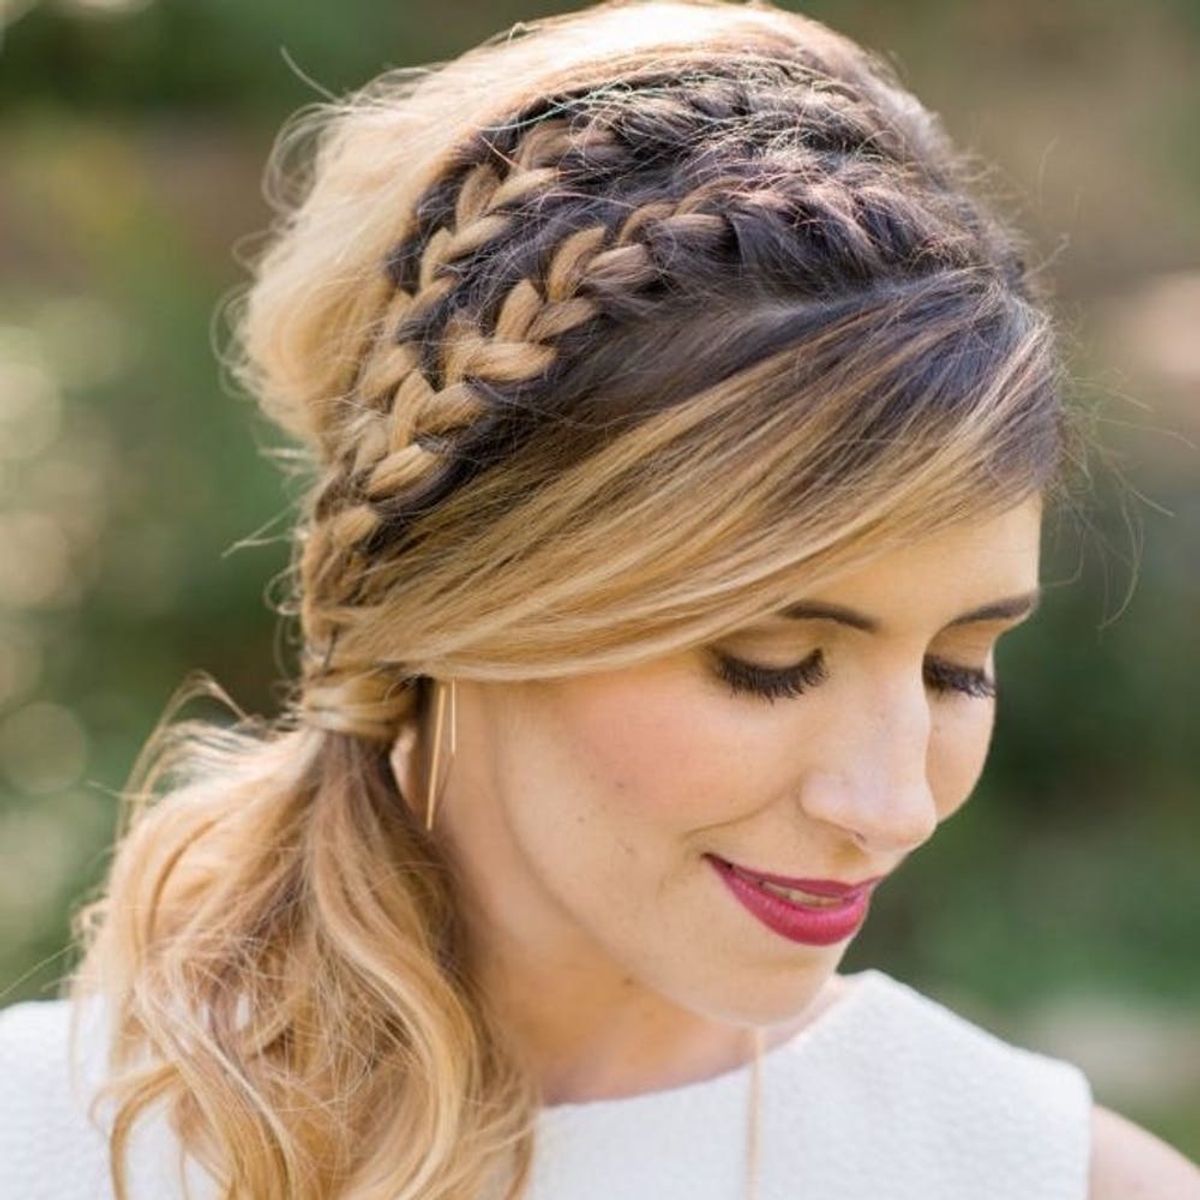 7 Romantic Ways to Rock a Ponytail at Your Wedding